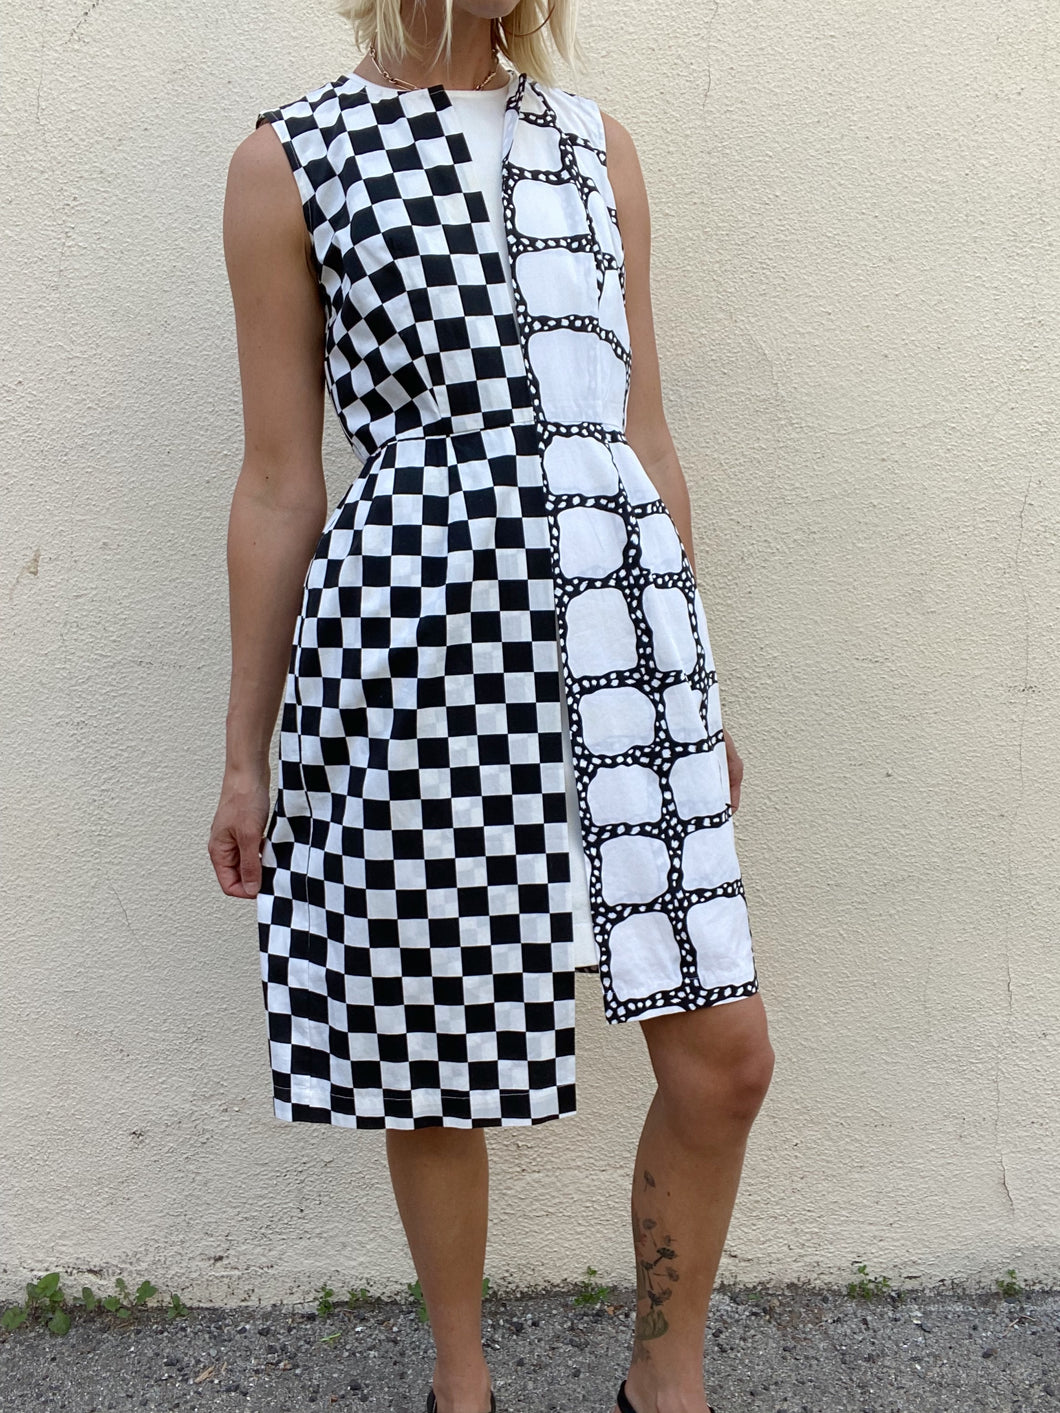 Comme des Garcons Checkered Dress - The Curatorial Dept.